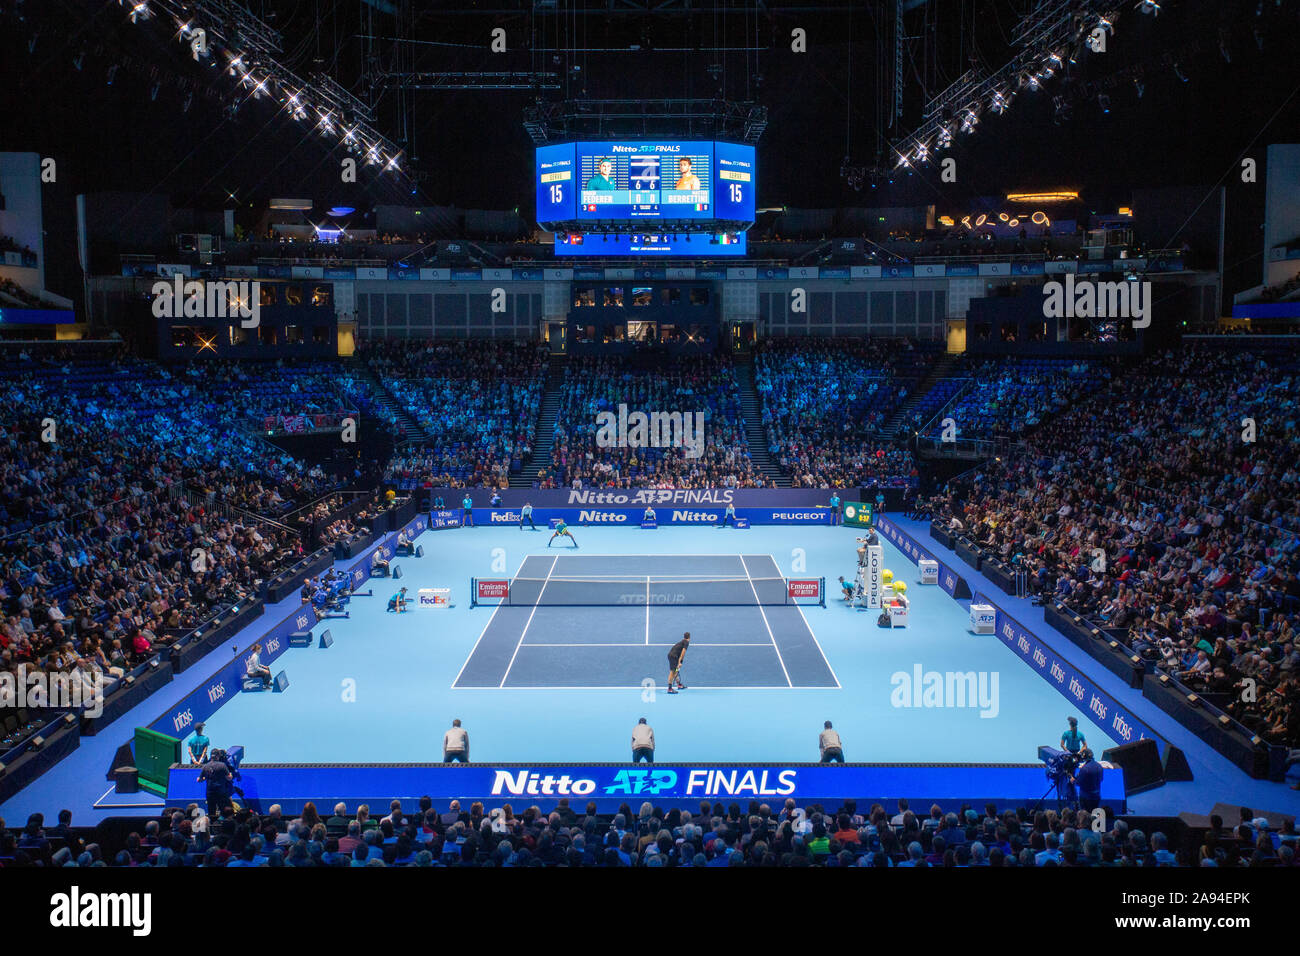 London, UK. 12th Nov, 2019. 12th November 2019; O2 Arena, London, England;  Nitto ATP Tennis Finals; A general view of O2 Arena during the match  between Roger Federer (SUI) and Matteo Berrettini (